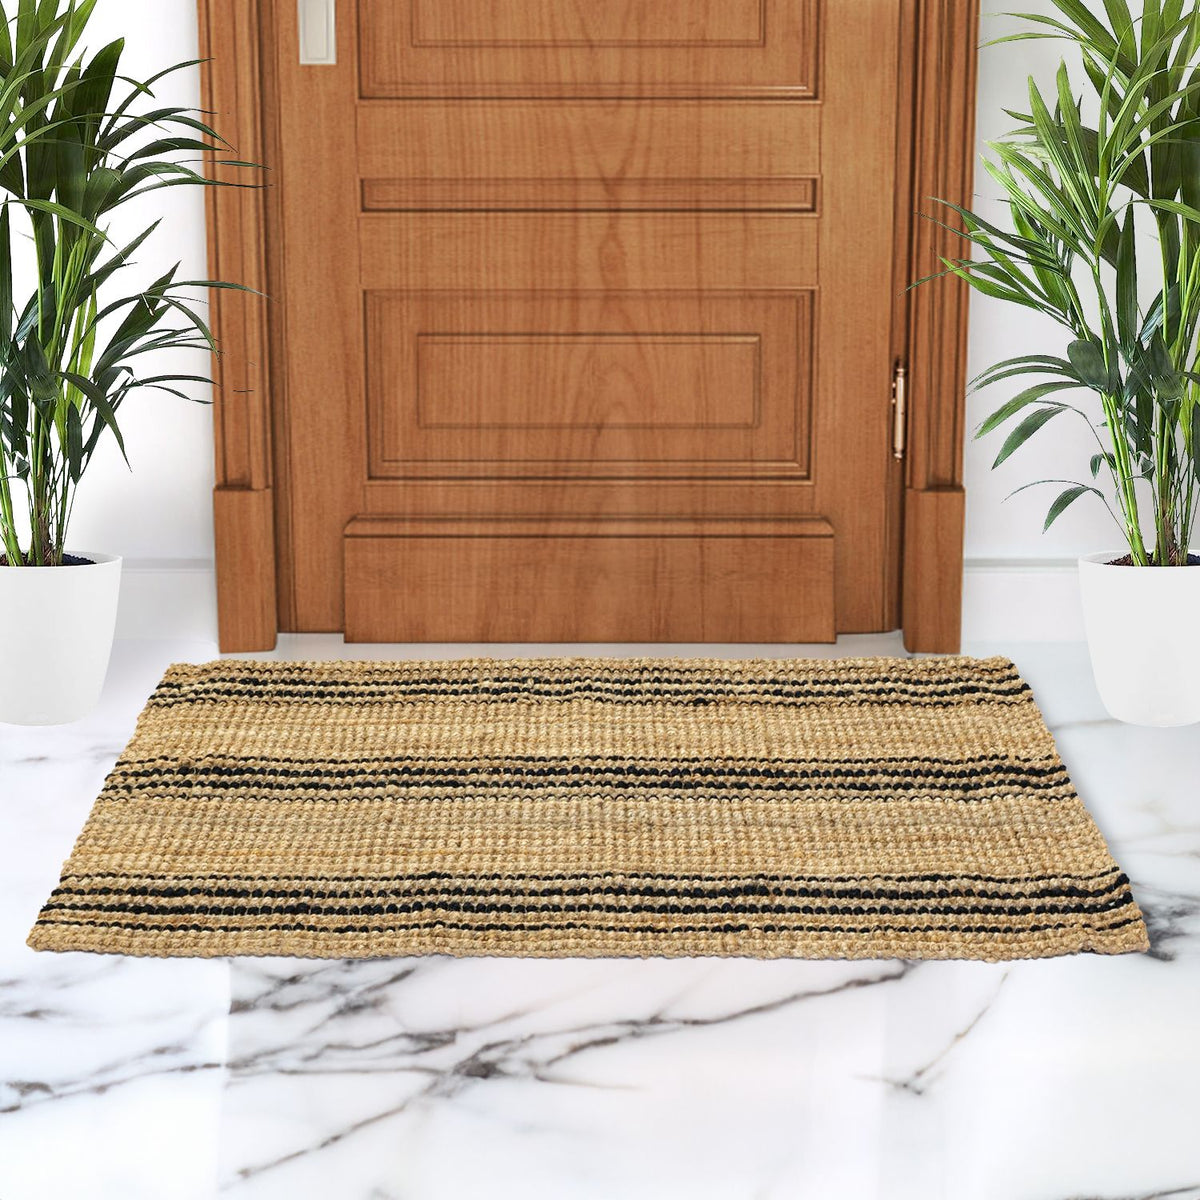 Lines of Life - Artisan Luxe Rug - Handwoven Jute Carpet - Organic Natural Sustainable